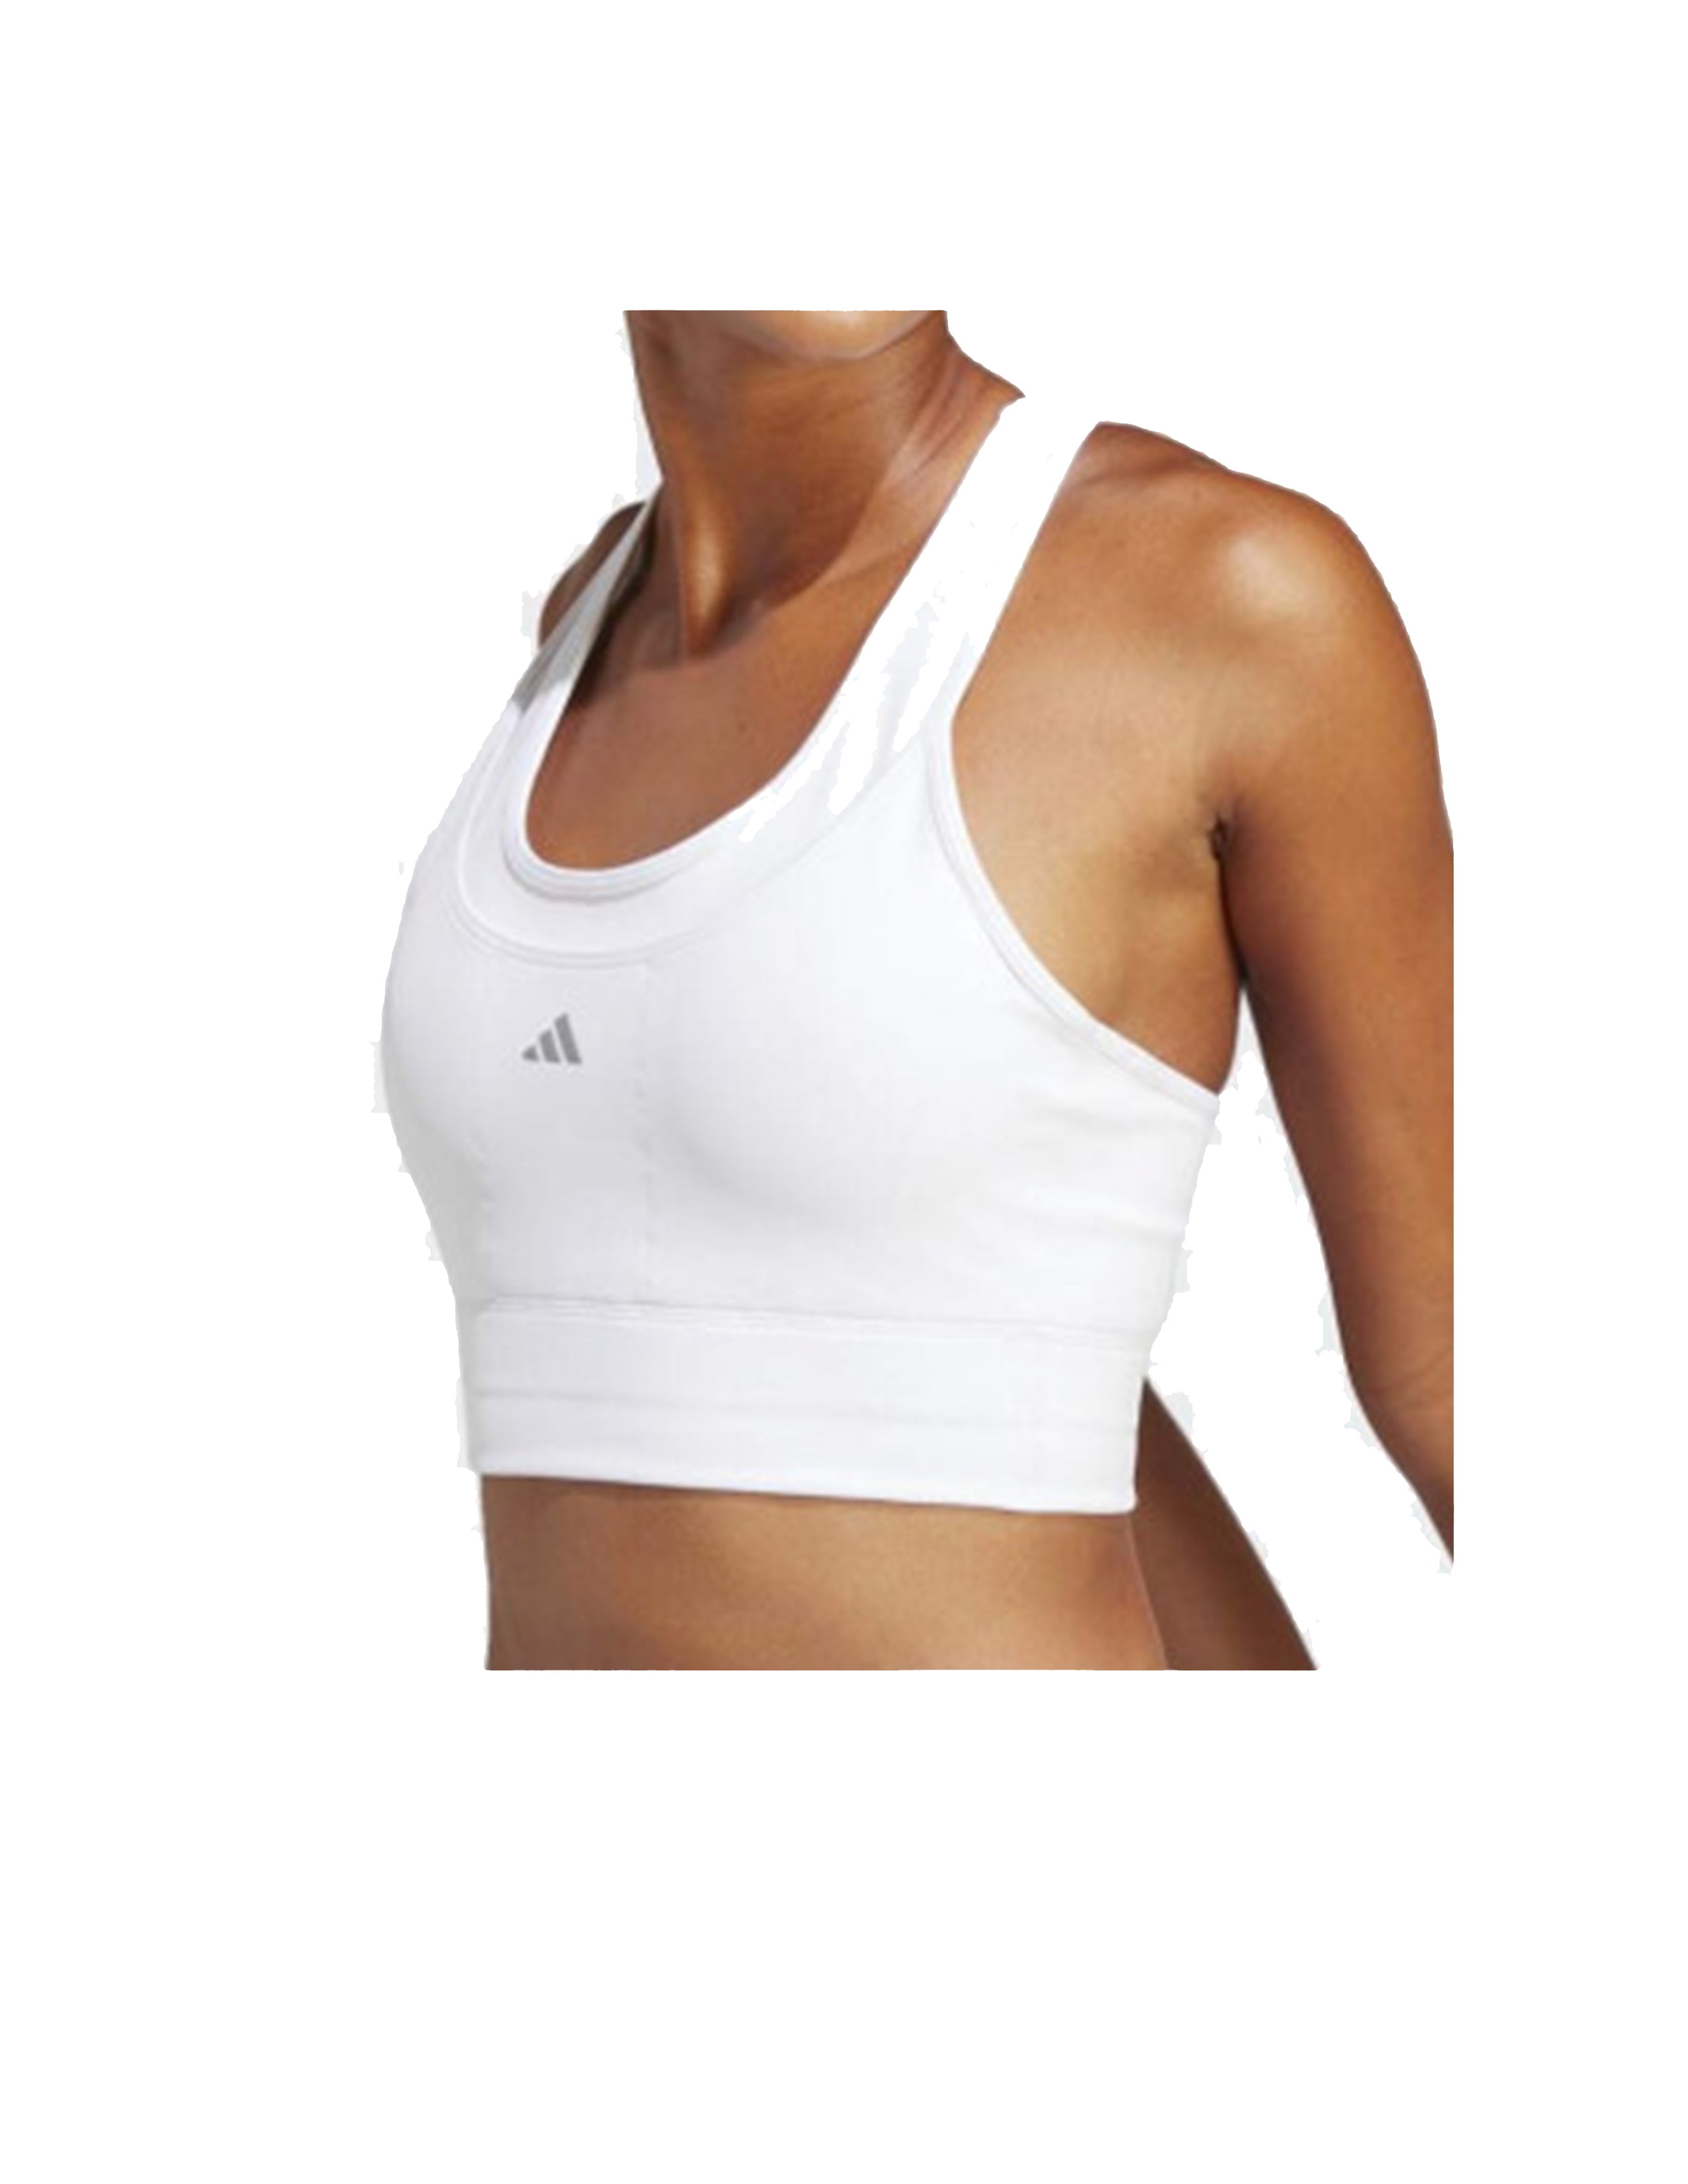 adidas Womens Solid Techfit Molded Cup Sports Bra Black Size Small 